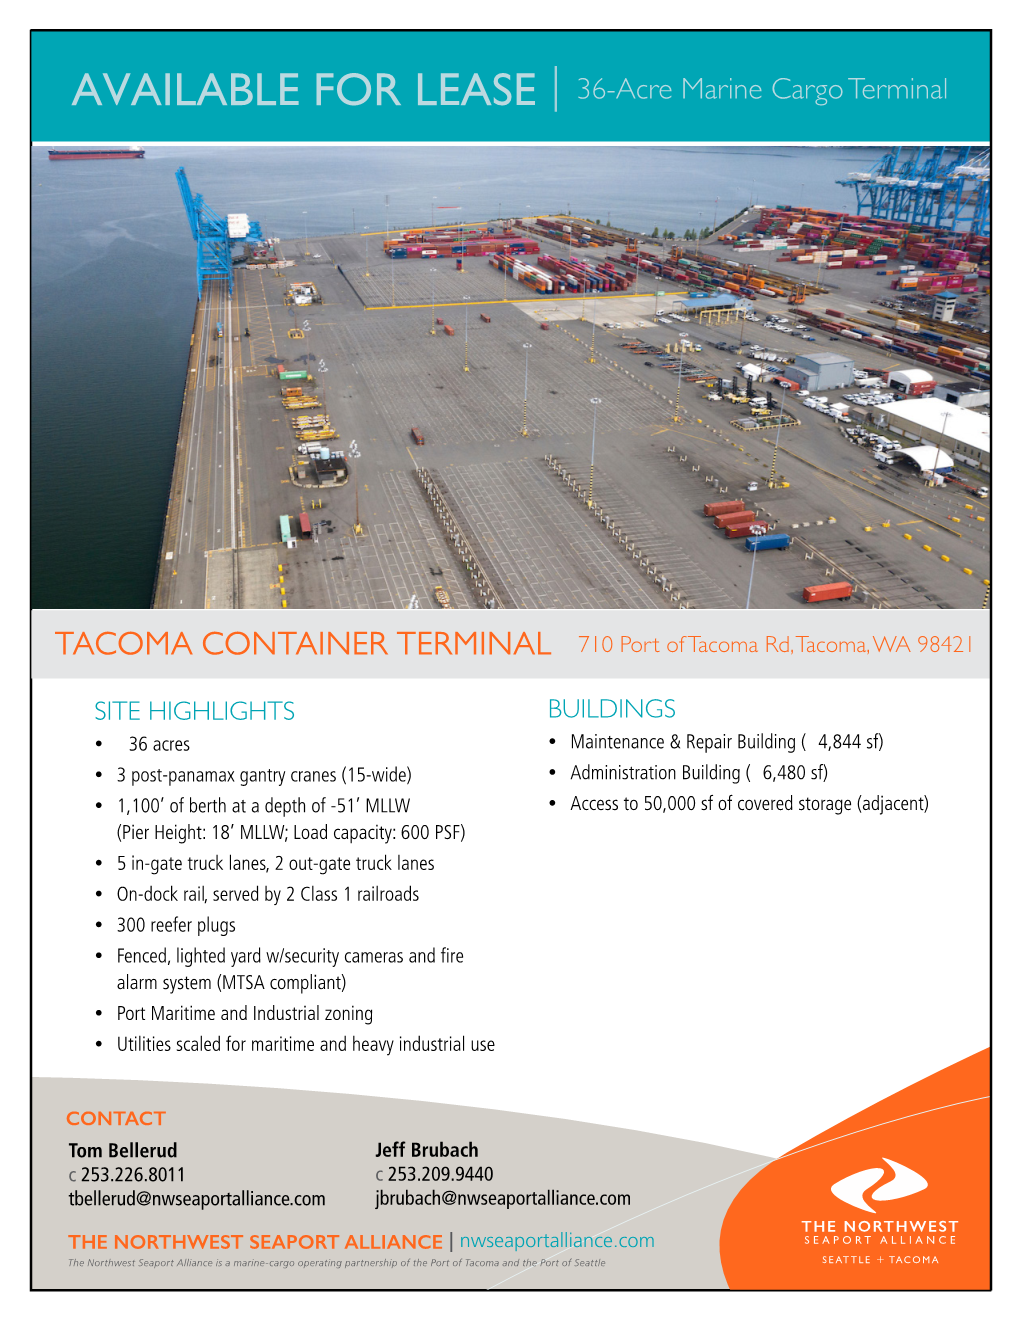 AVAILABLE for LEASE | 36-Acre Marine Cargo Terminal